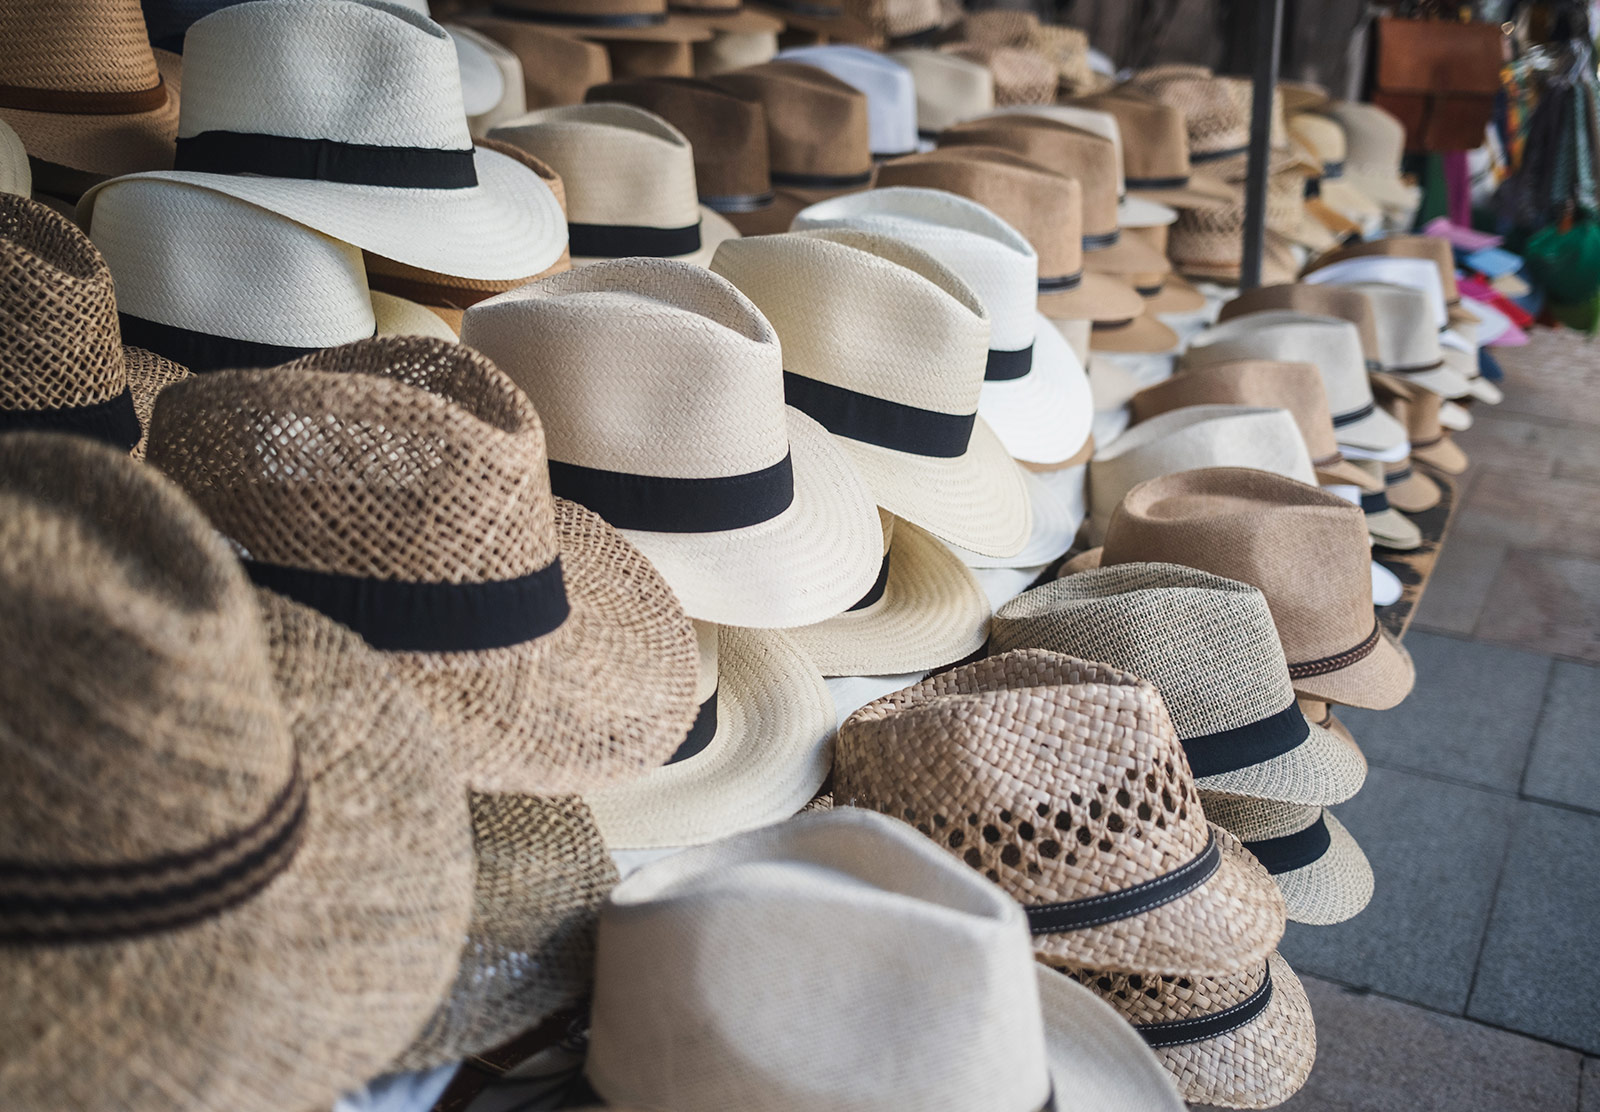 Rows of hats